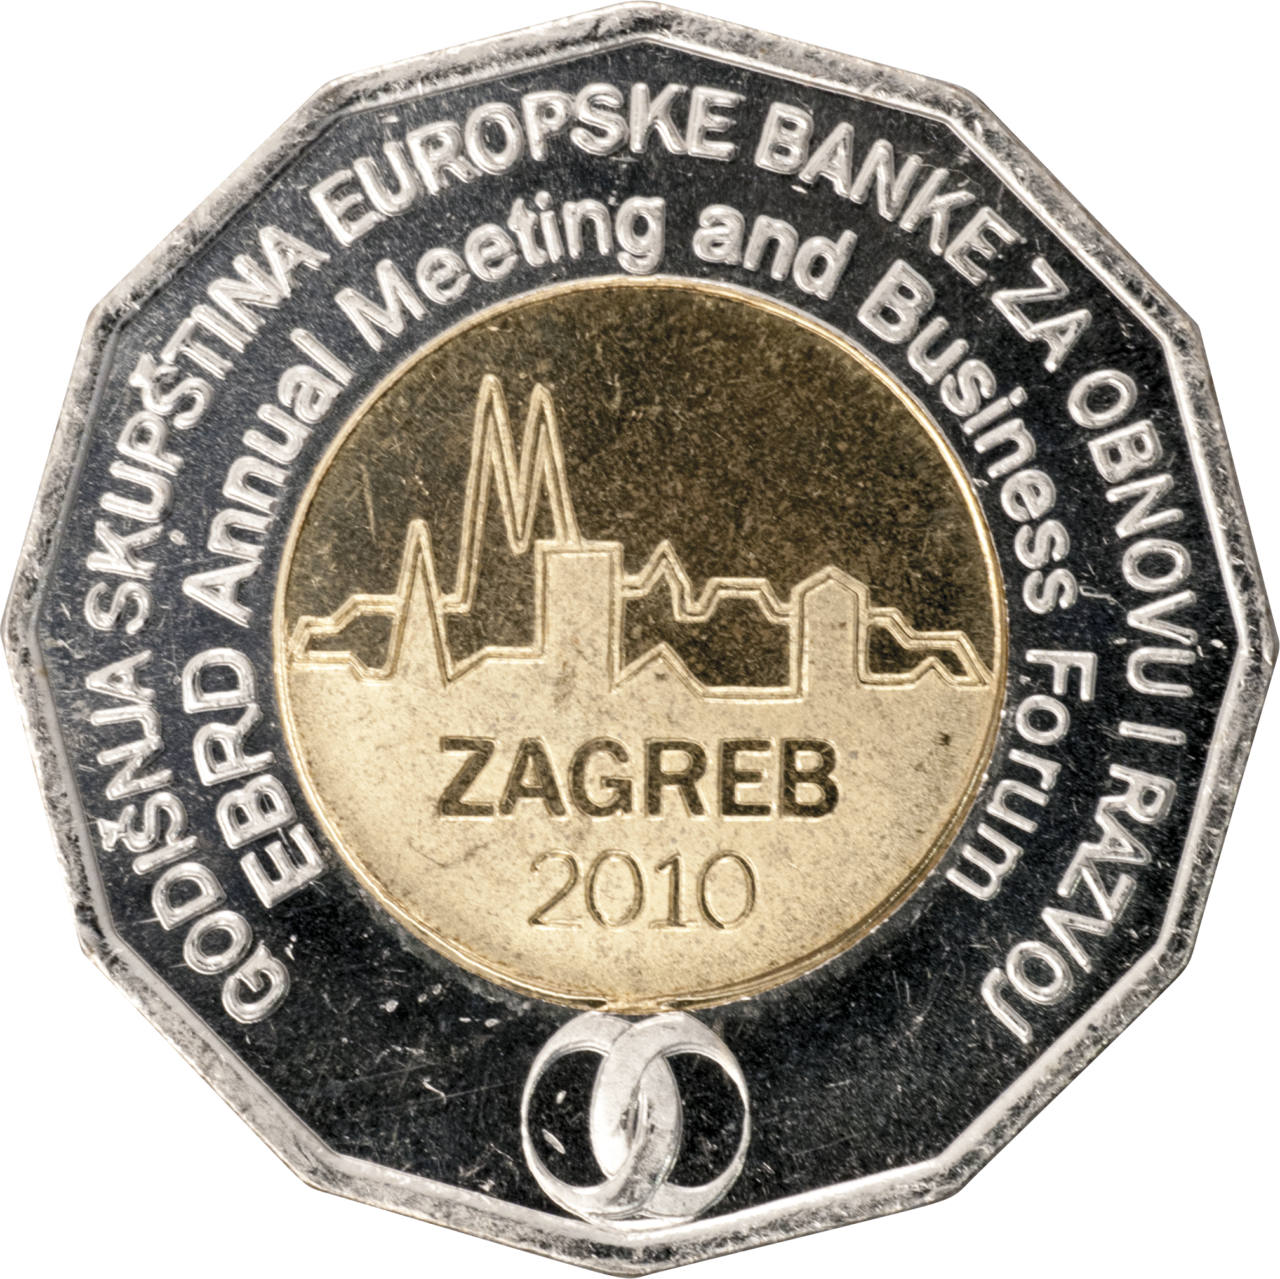 25 kuna - Annual Meeting of the European Bank for Reconstruction and Development, Zagreb 2010